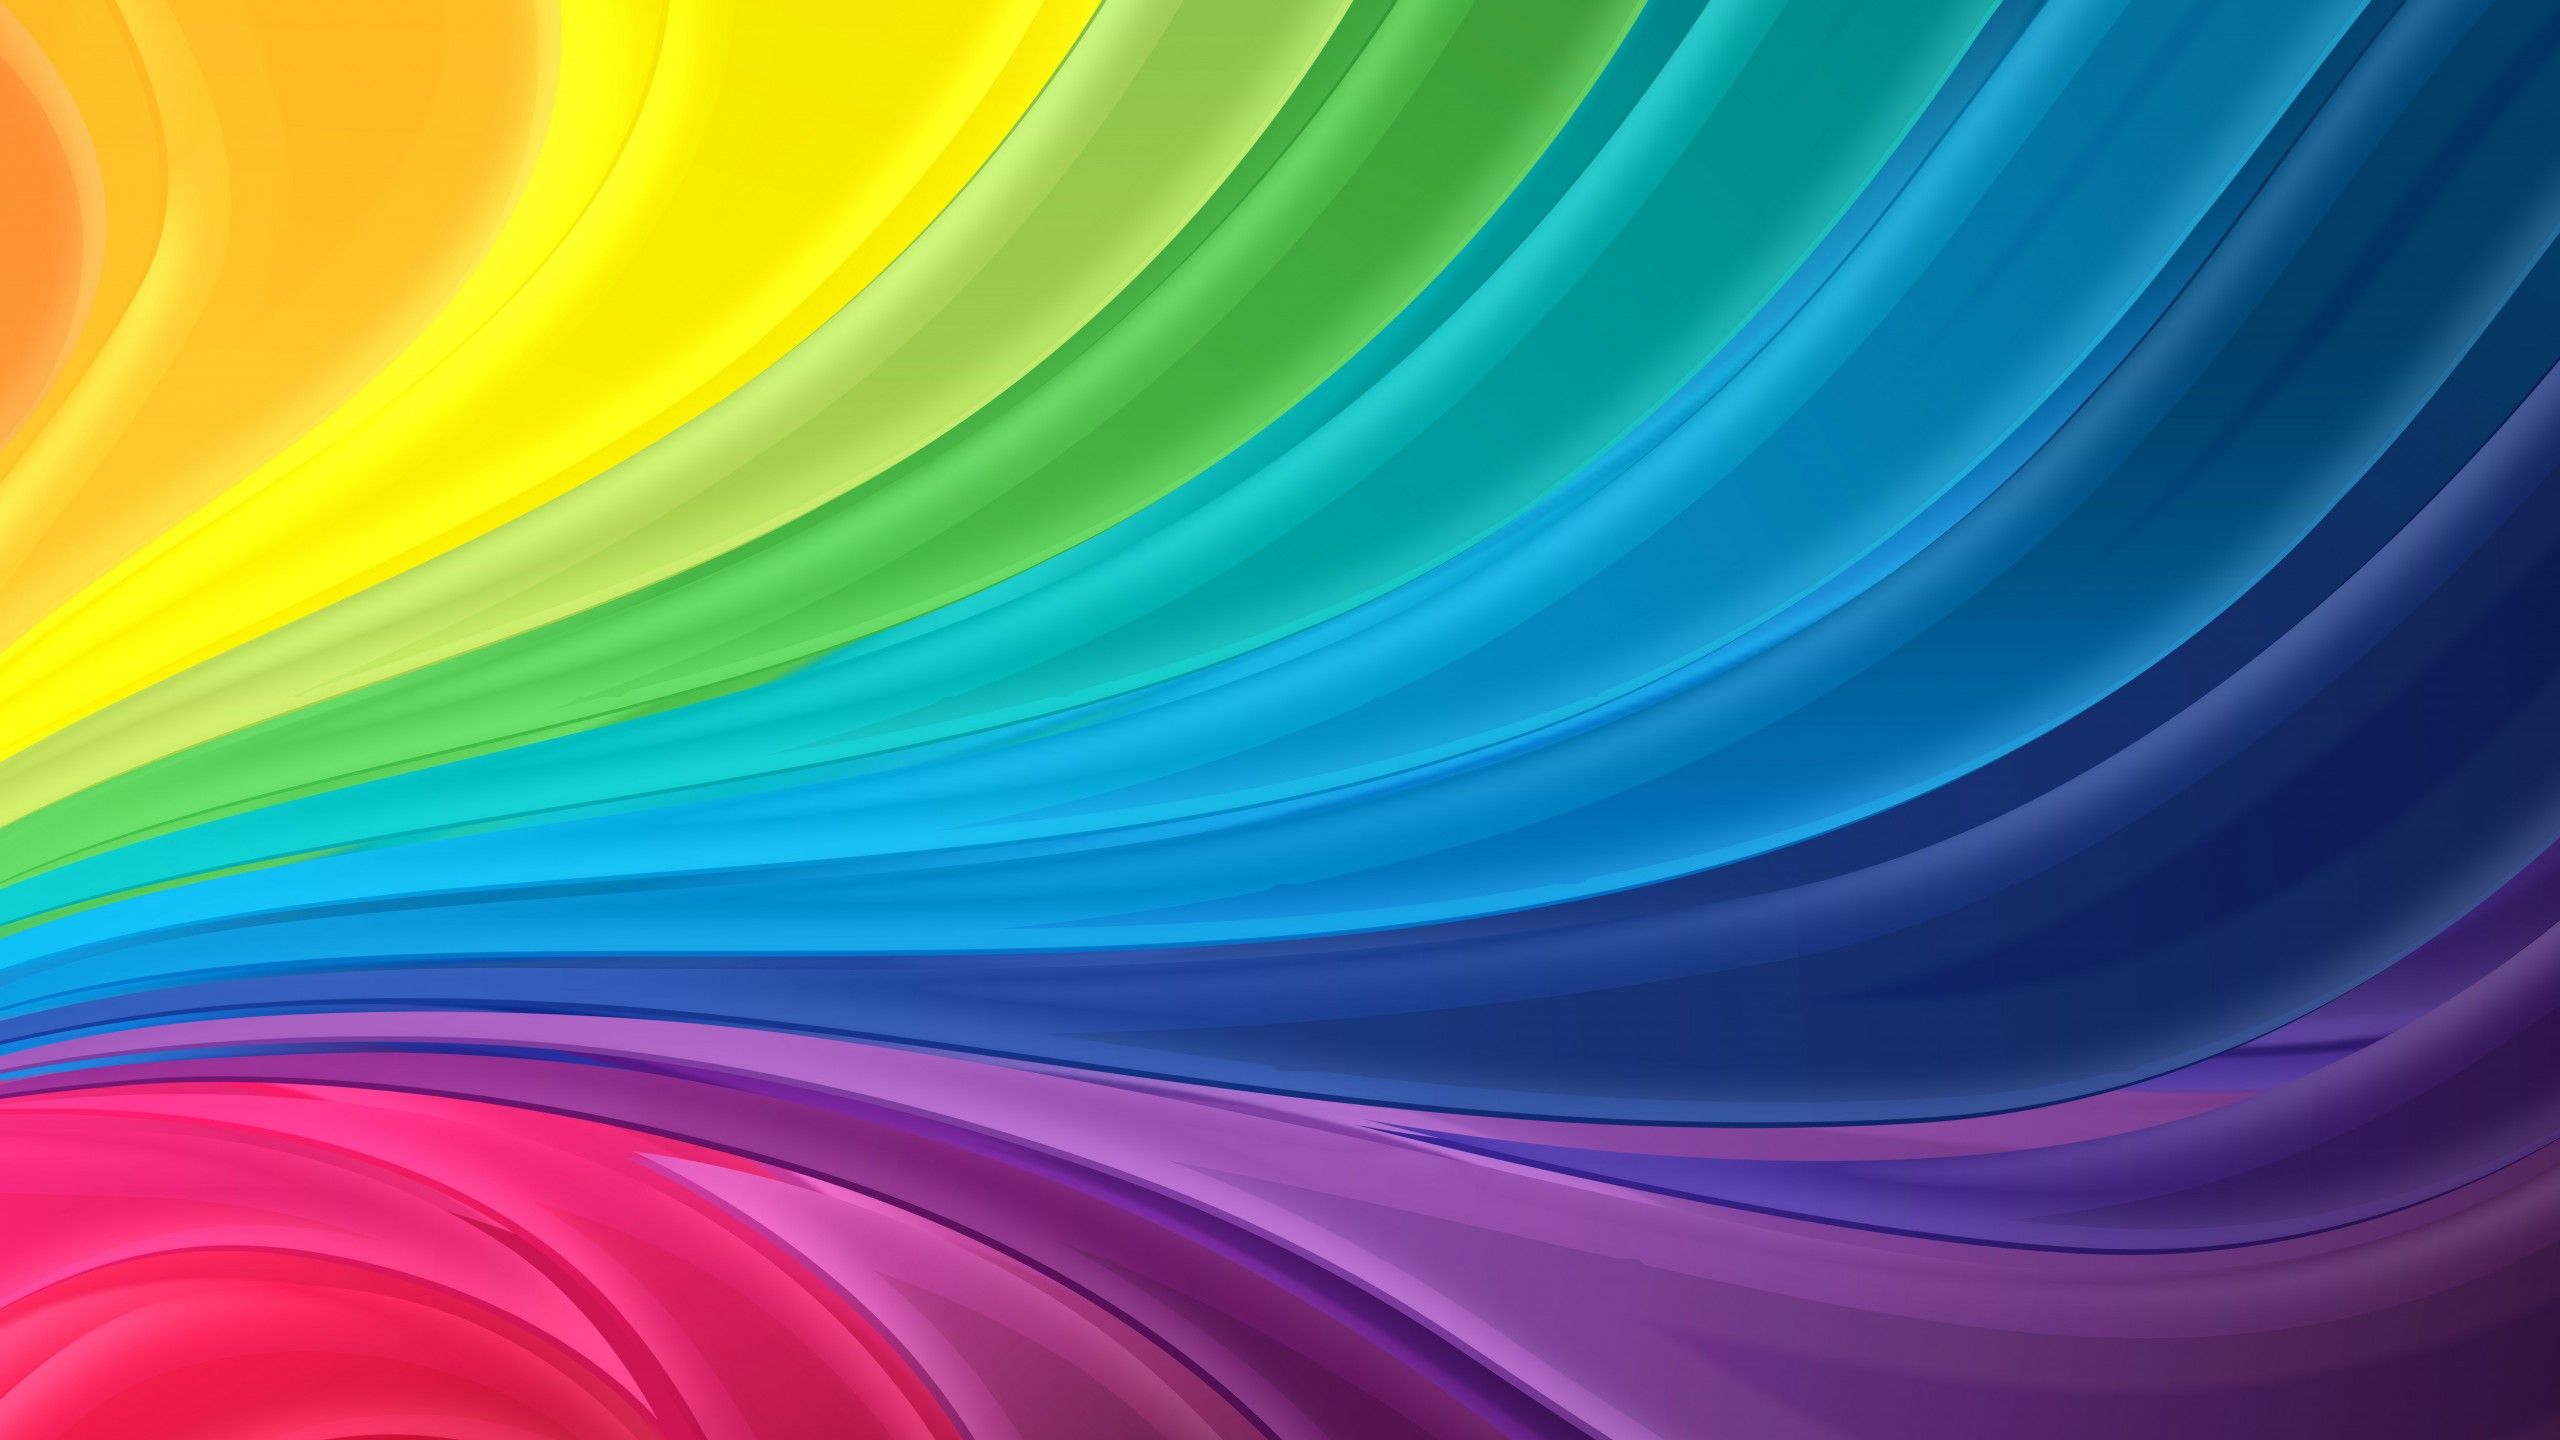 Rainbow colors 4K Wallpaper, Colorful, Multi color, Waves, 5K, Abstract